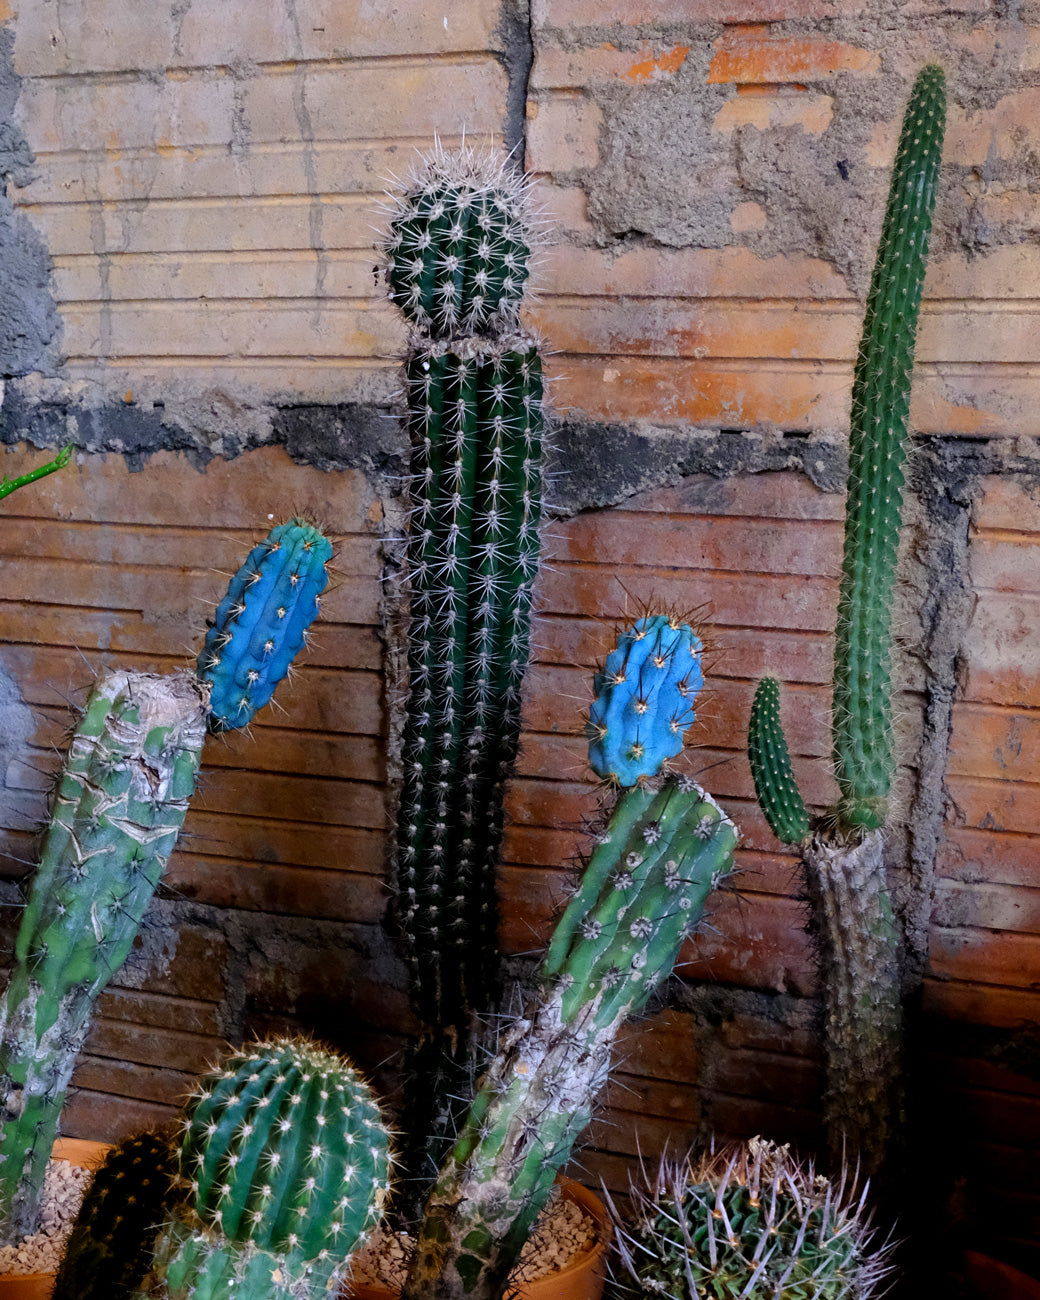 Several mother cactus plants with new growth for sale at Tula Plants & Design to celebrate Mother Plant's Day.